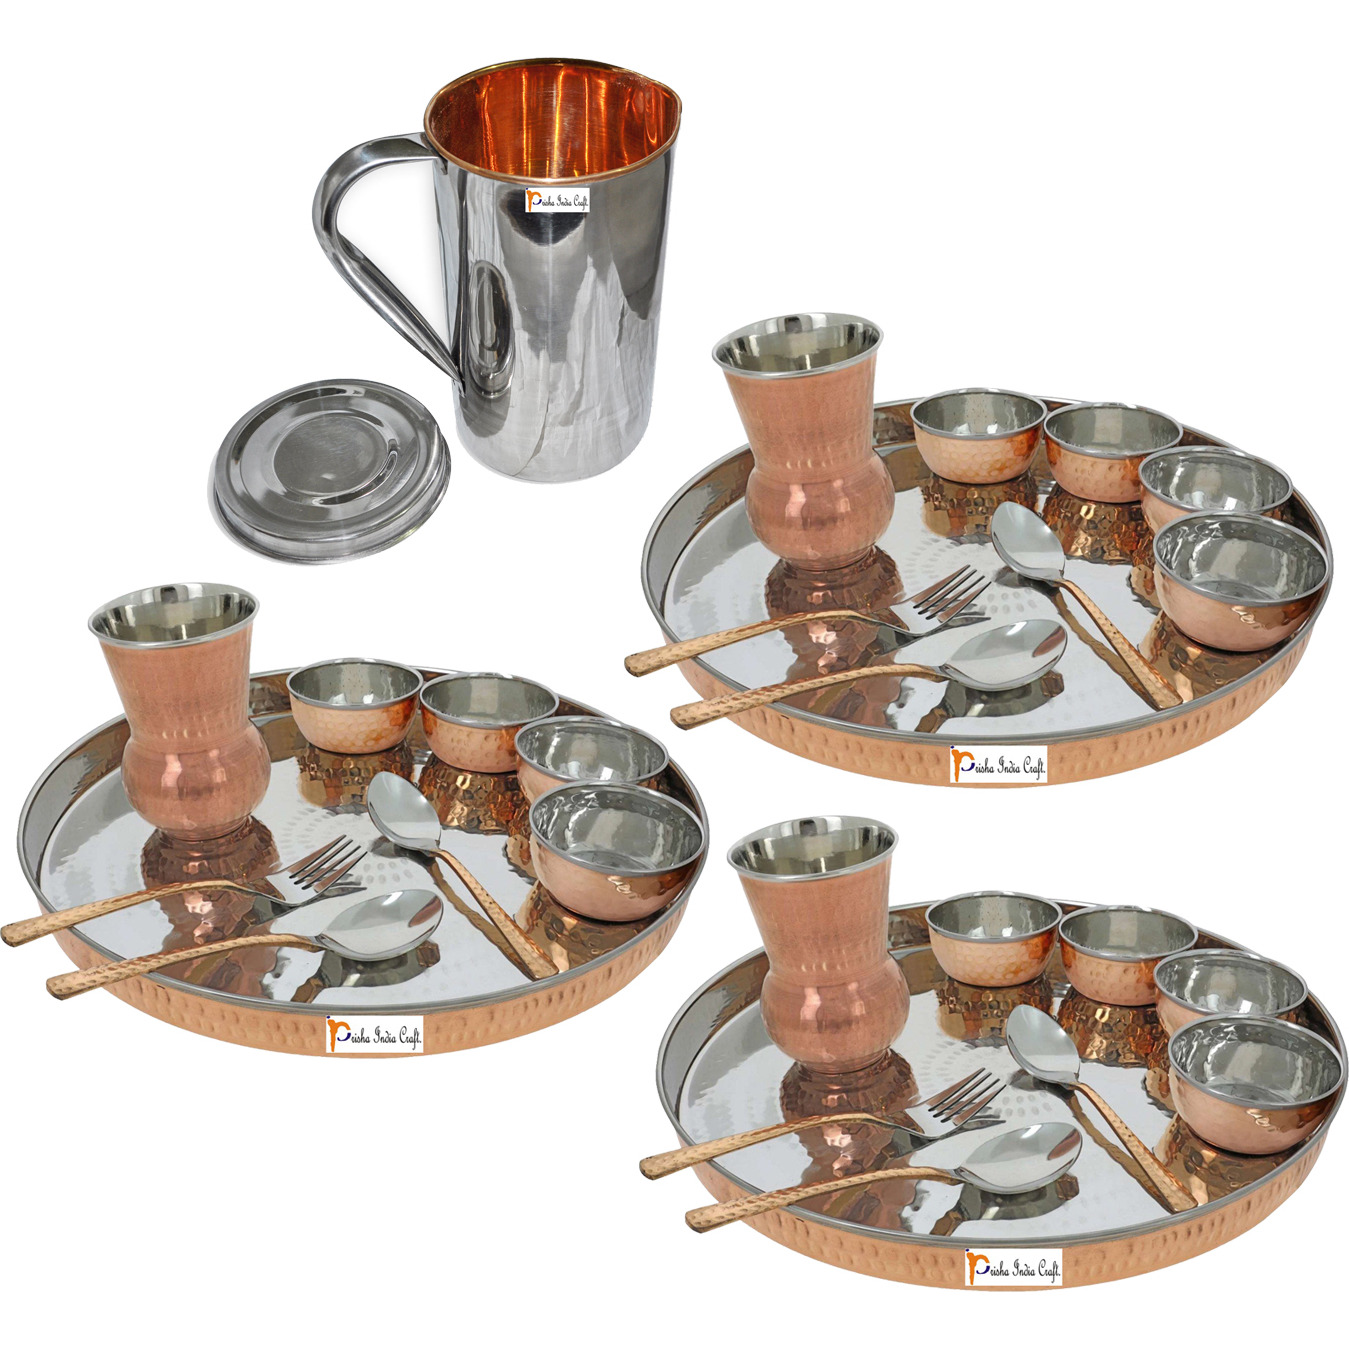 Prisha India Craft B. Set of 3 Dinnerware Traditional Stainless Steel Copper Dinner Set of Thali Plate, Bowls, Glass and Spoons, Dia 13  With 1 Stainless Steel Copper Pitcher Jug - Christmas Gift